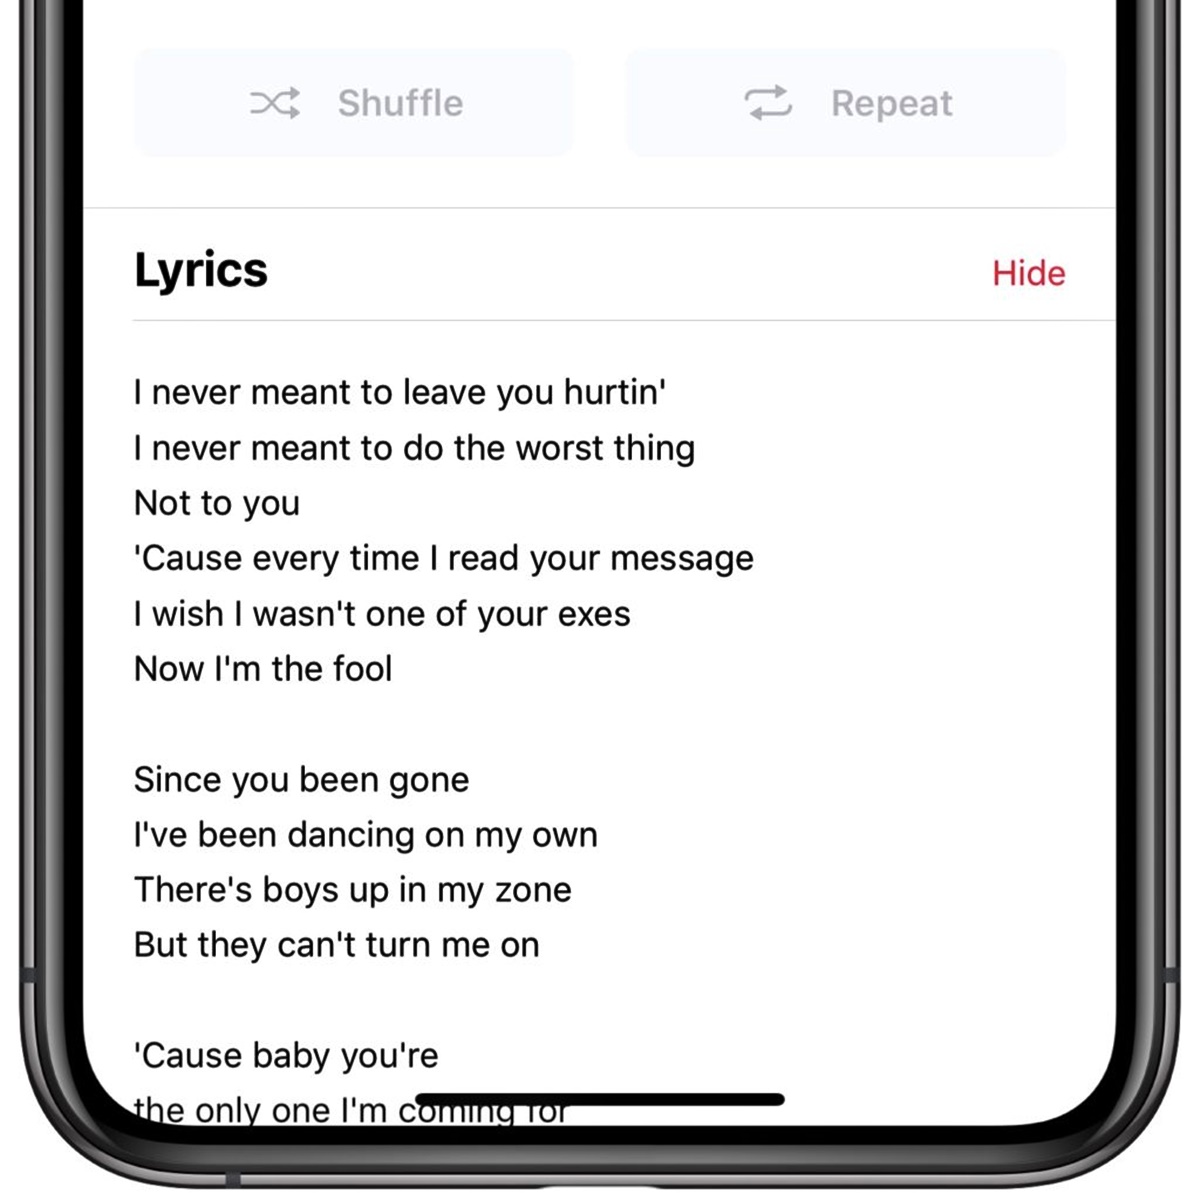 How To See Lyrics In Apple Music